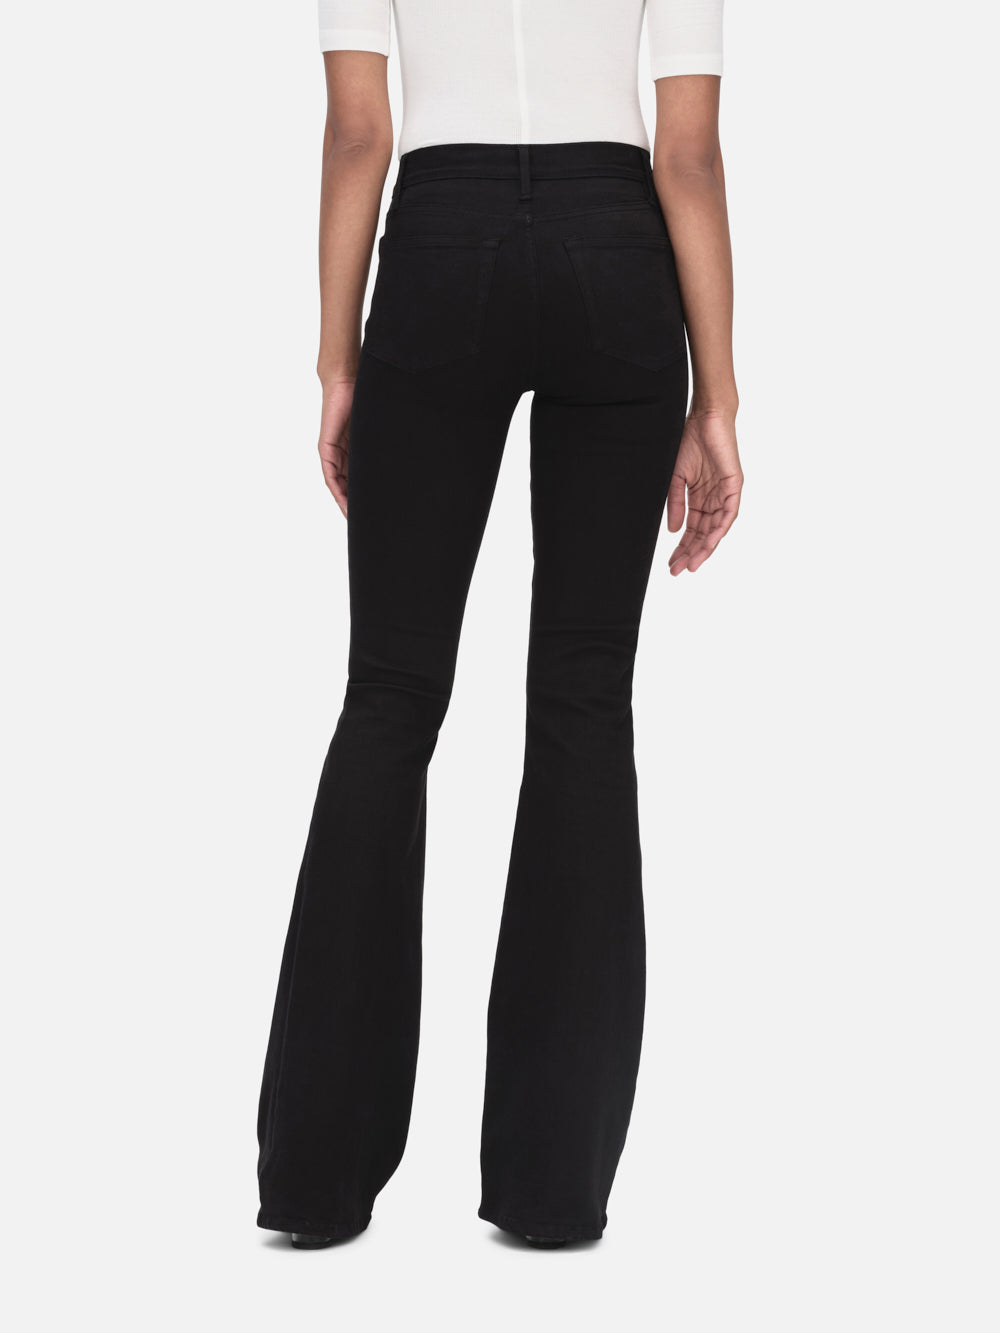 Women's Pull-On Stretch Bootcut Denim Jean Mini Flare Pants Black Small at   Women's Jeans store